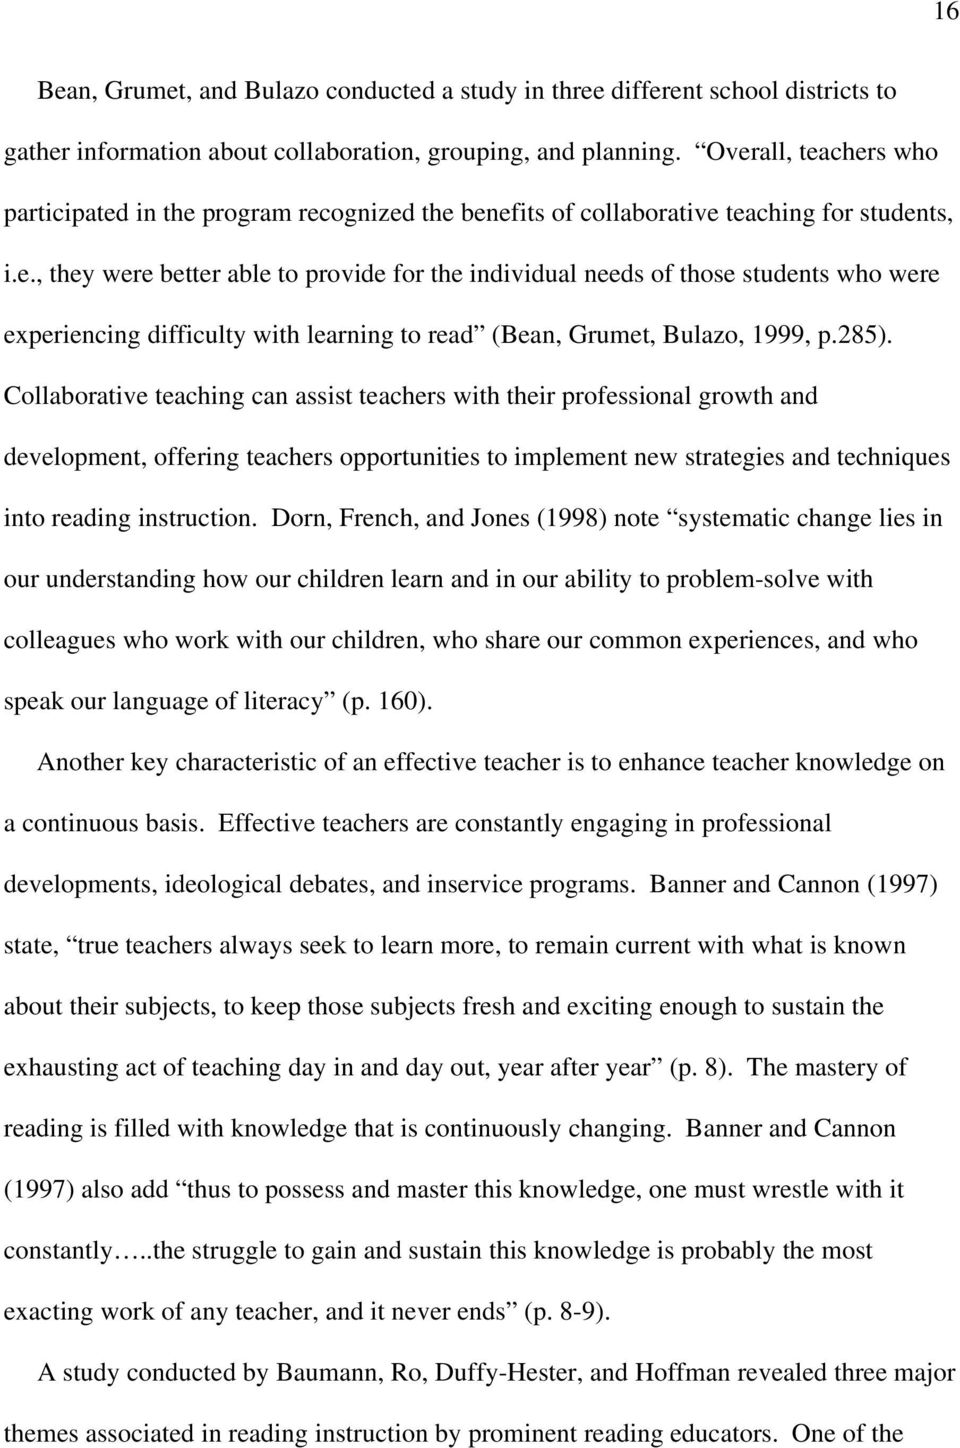 285). Collaborative teaching can assist teachers with their professional growth and development, offering teachers opportunities to implement new strategies and techniques into reading instruction.